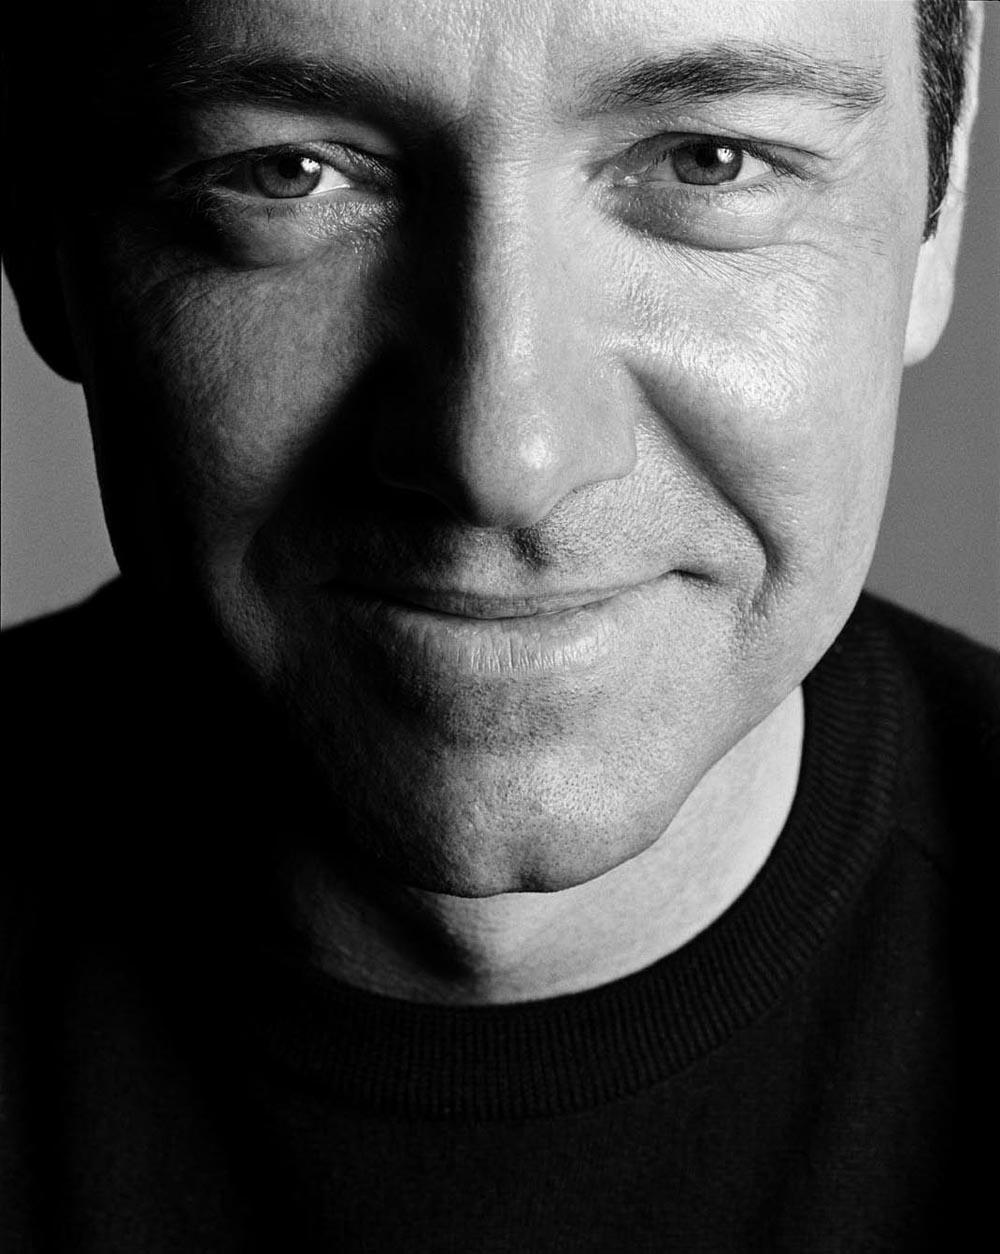 Photo №1228 Kevin Spacey.